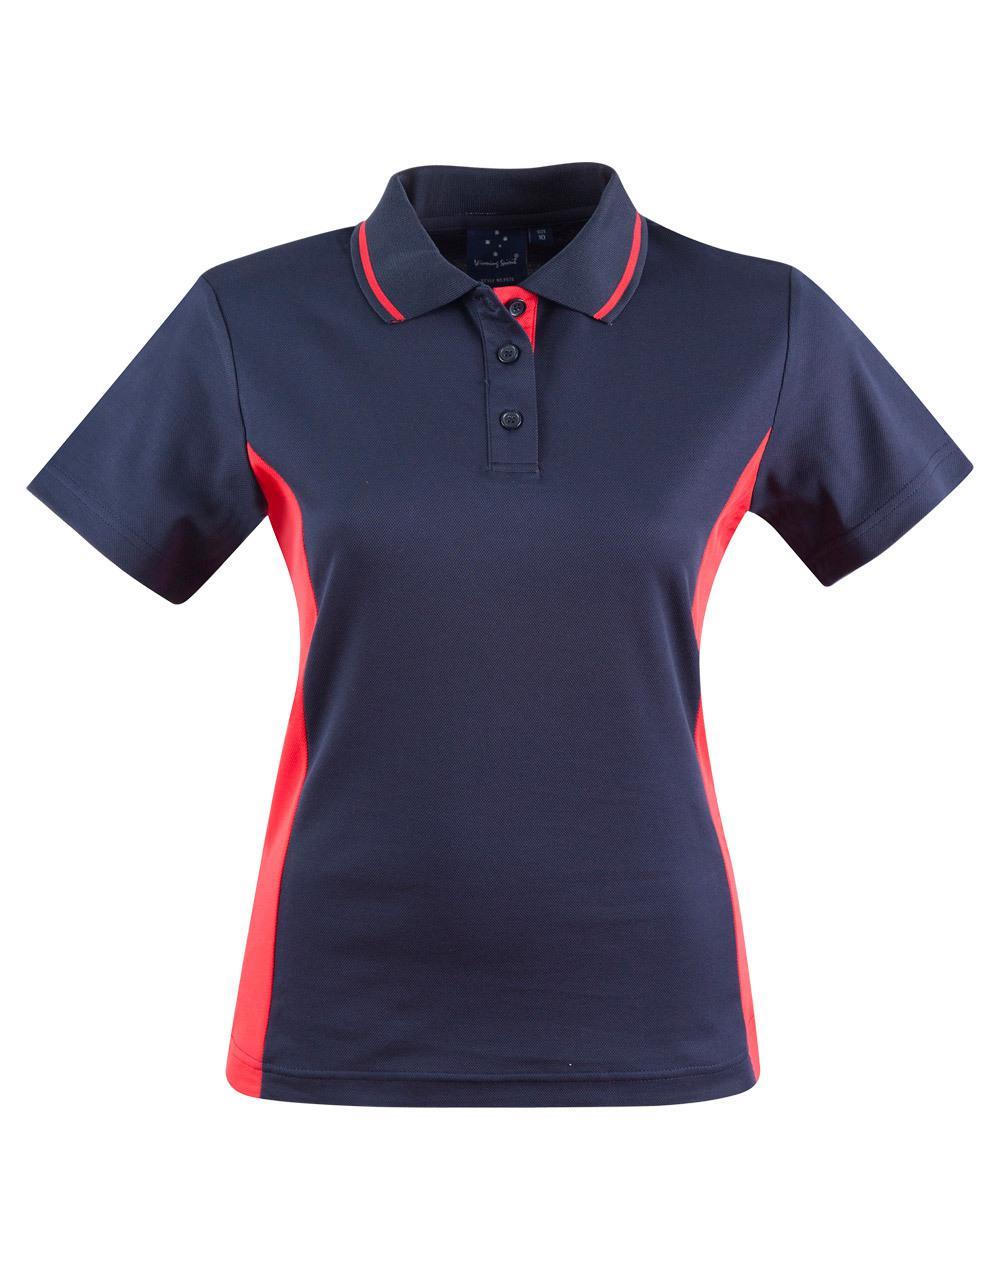 PS74 Sz 08 TEAMMATE Cotton Polyester Ladies Polo Shirt Navy/Red